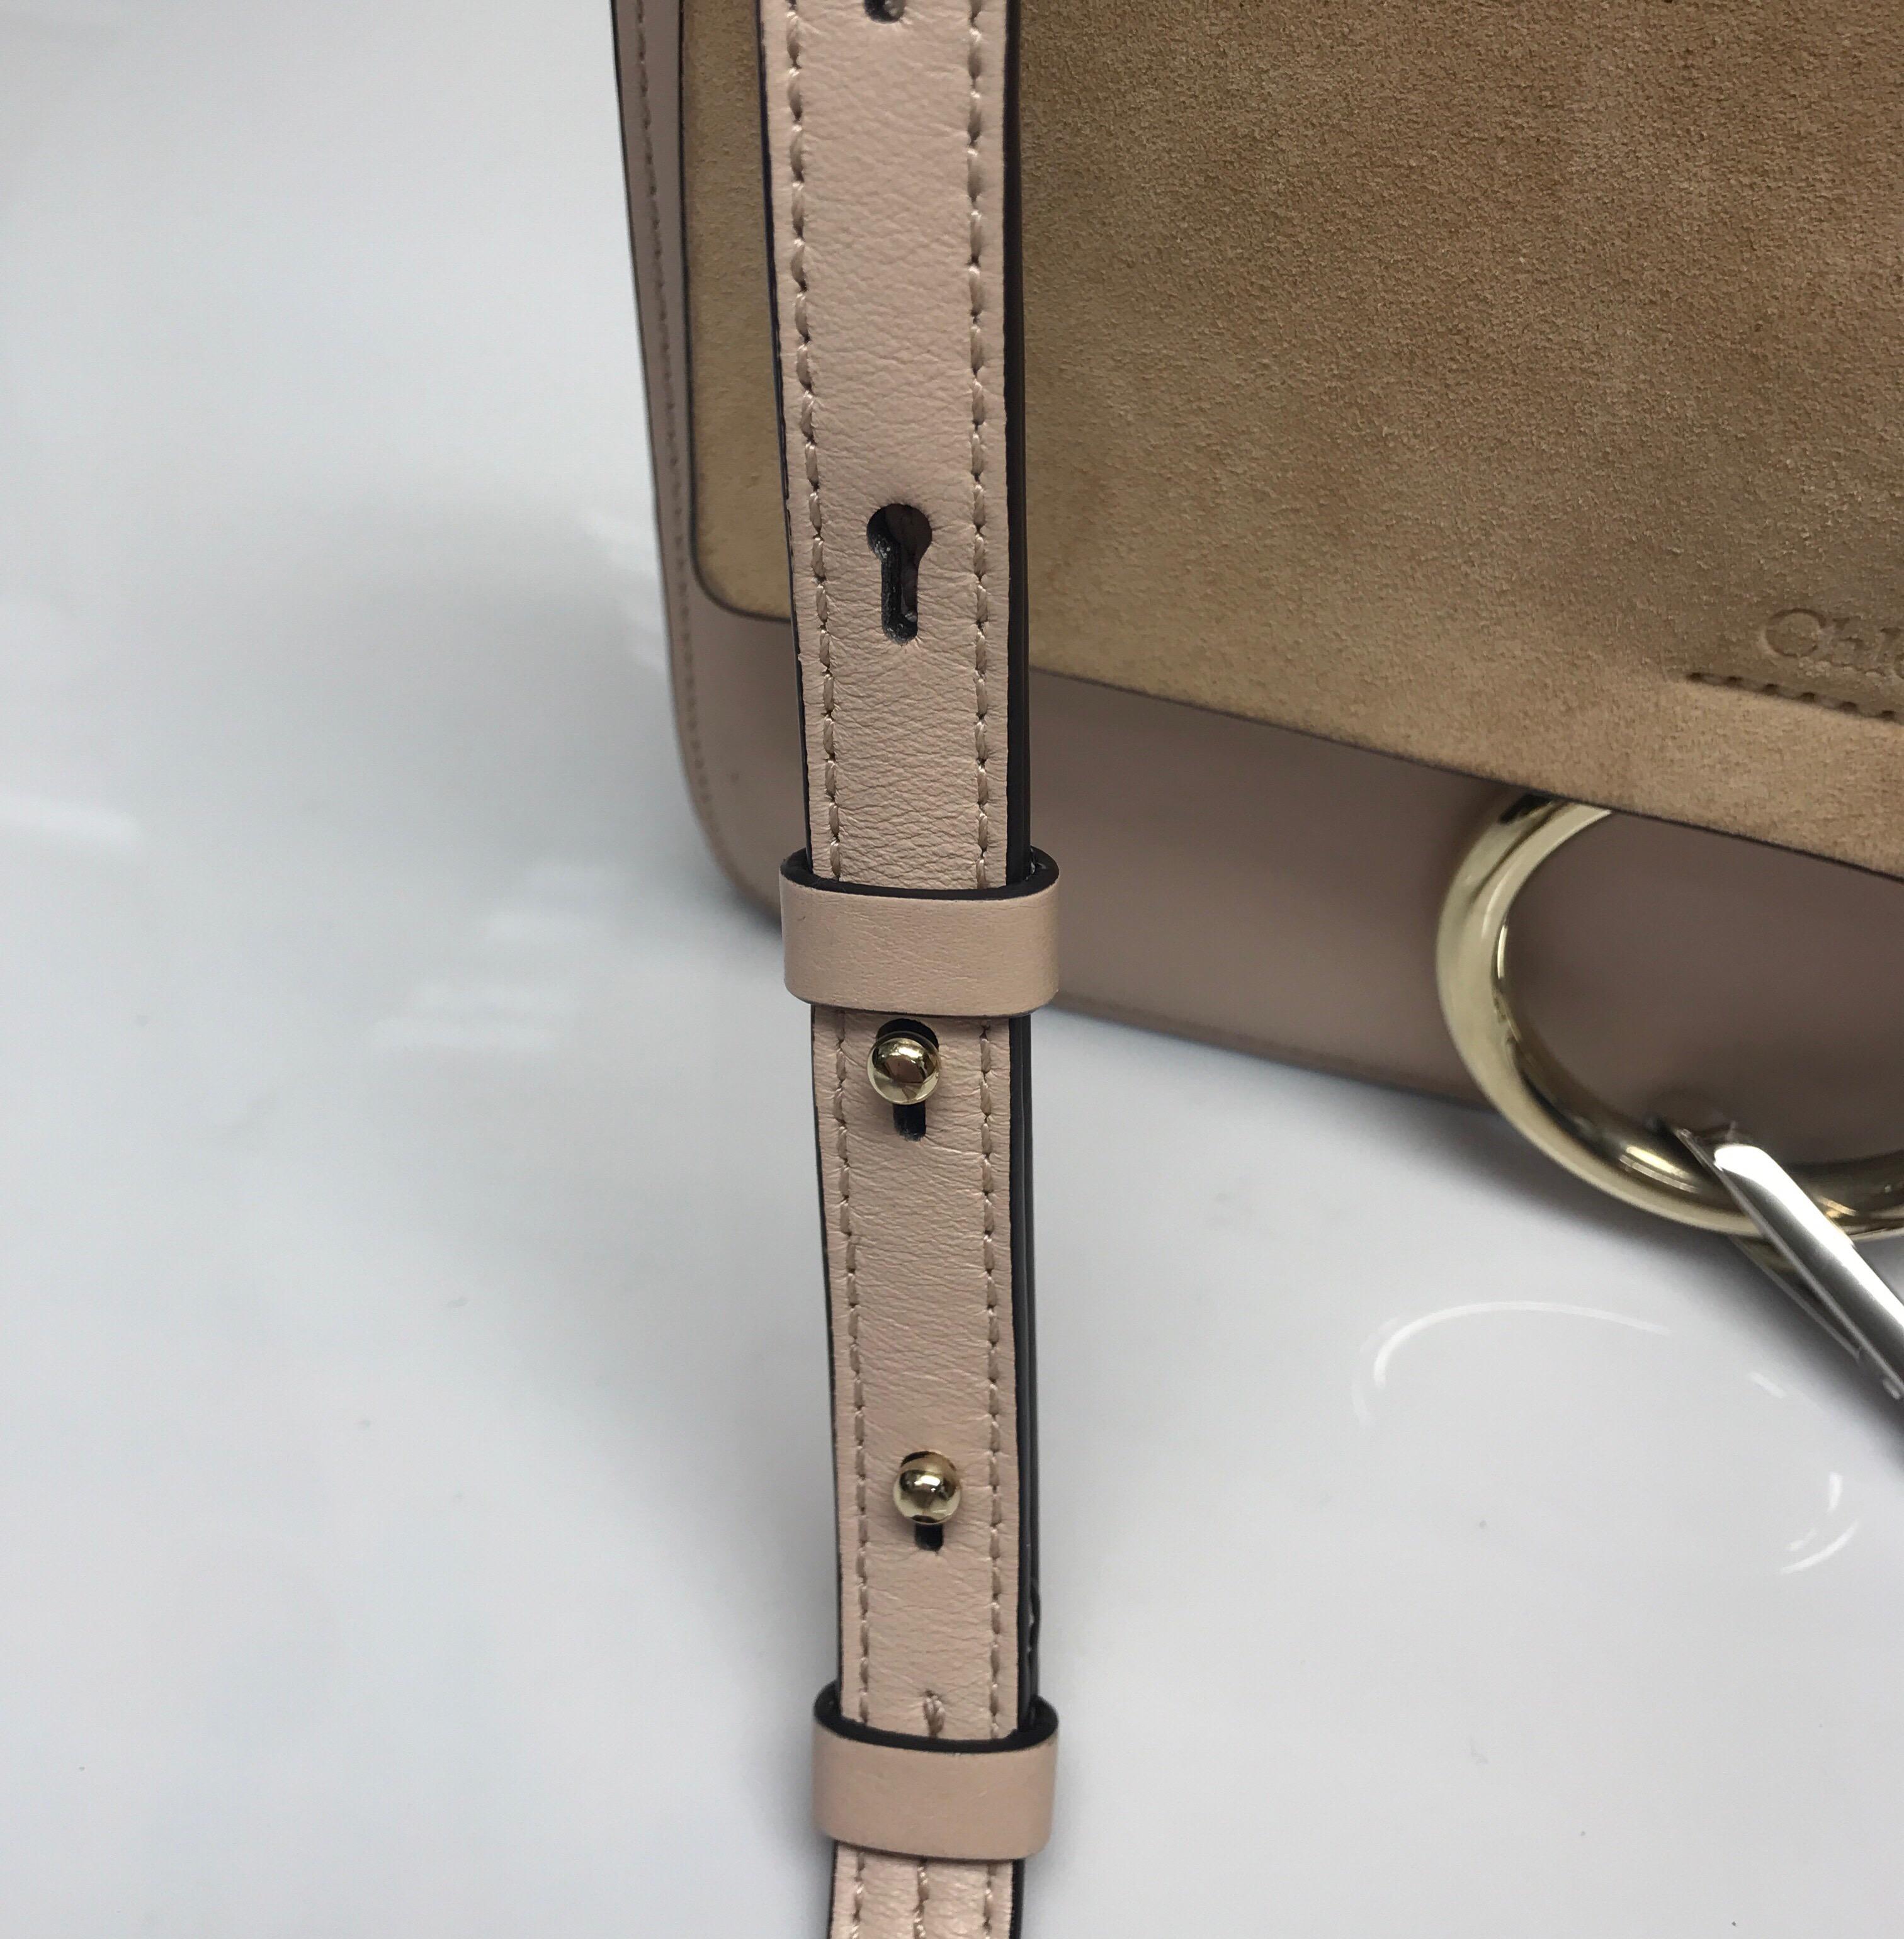 Chloe Blush Cross Body Bag w/ Tan Suede Flap In Good Condition For Sale In West Palm Beach, FL